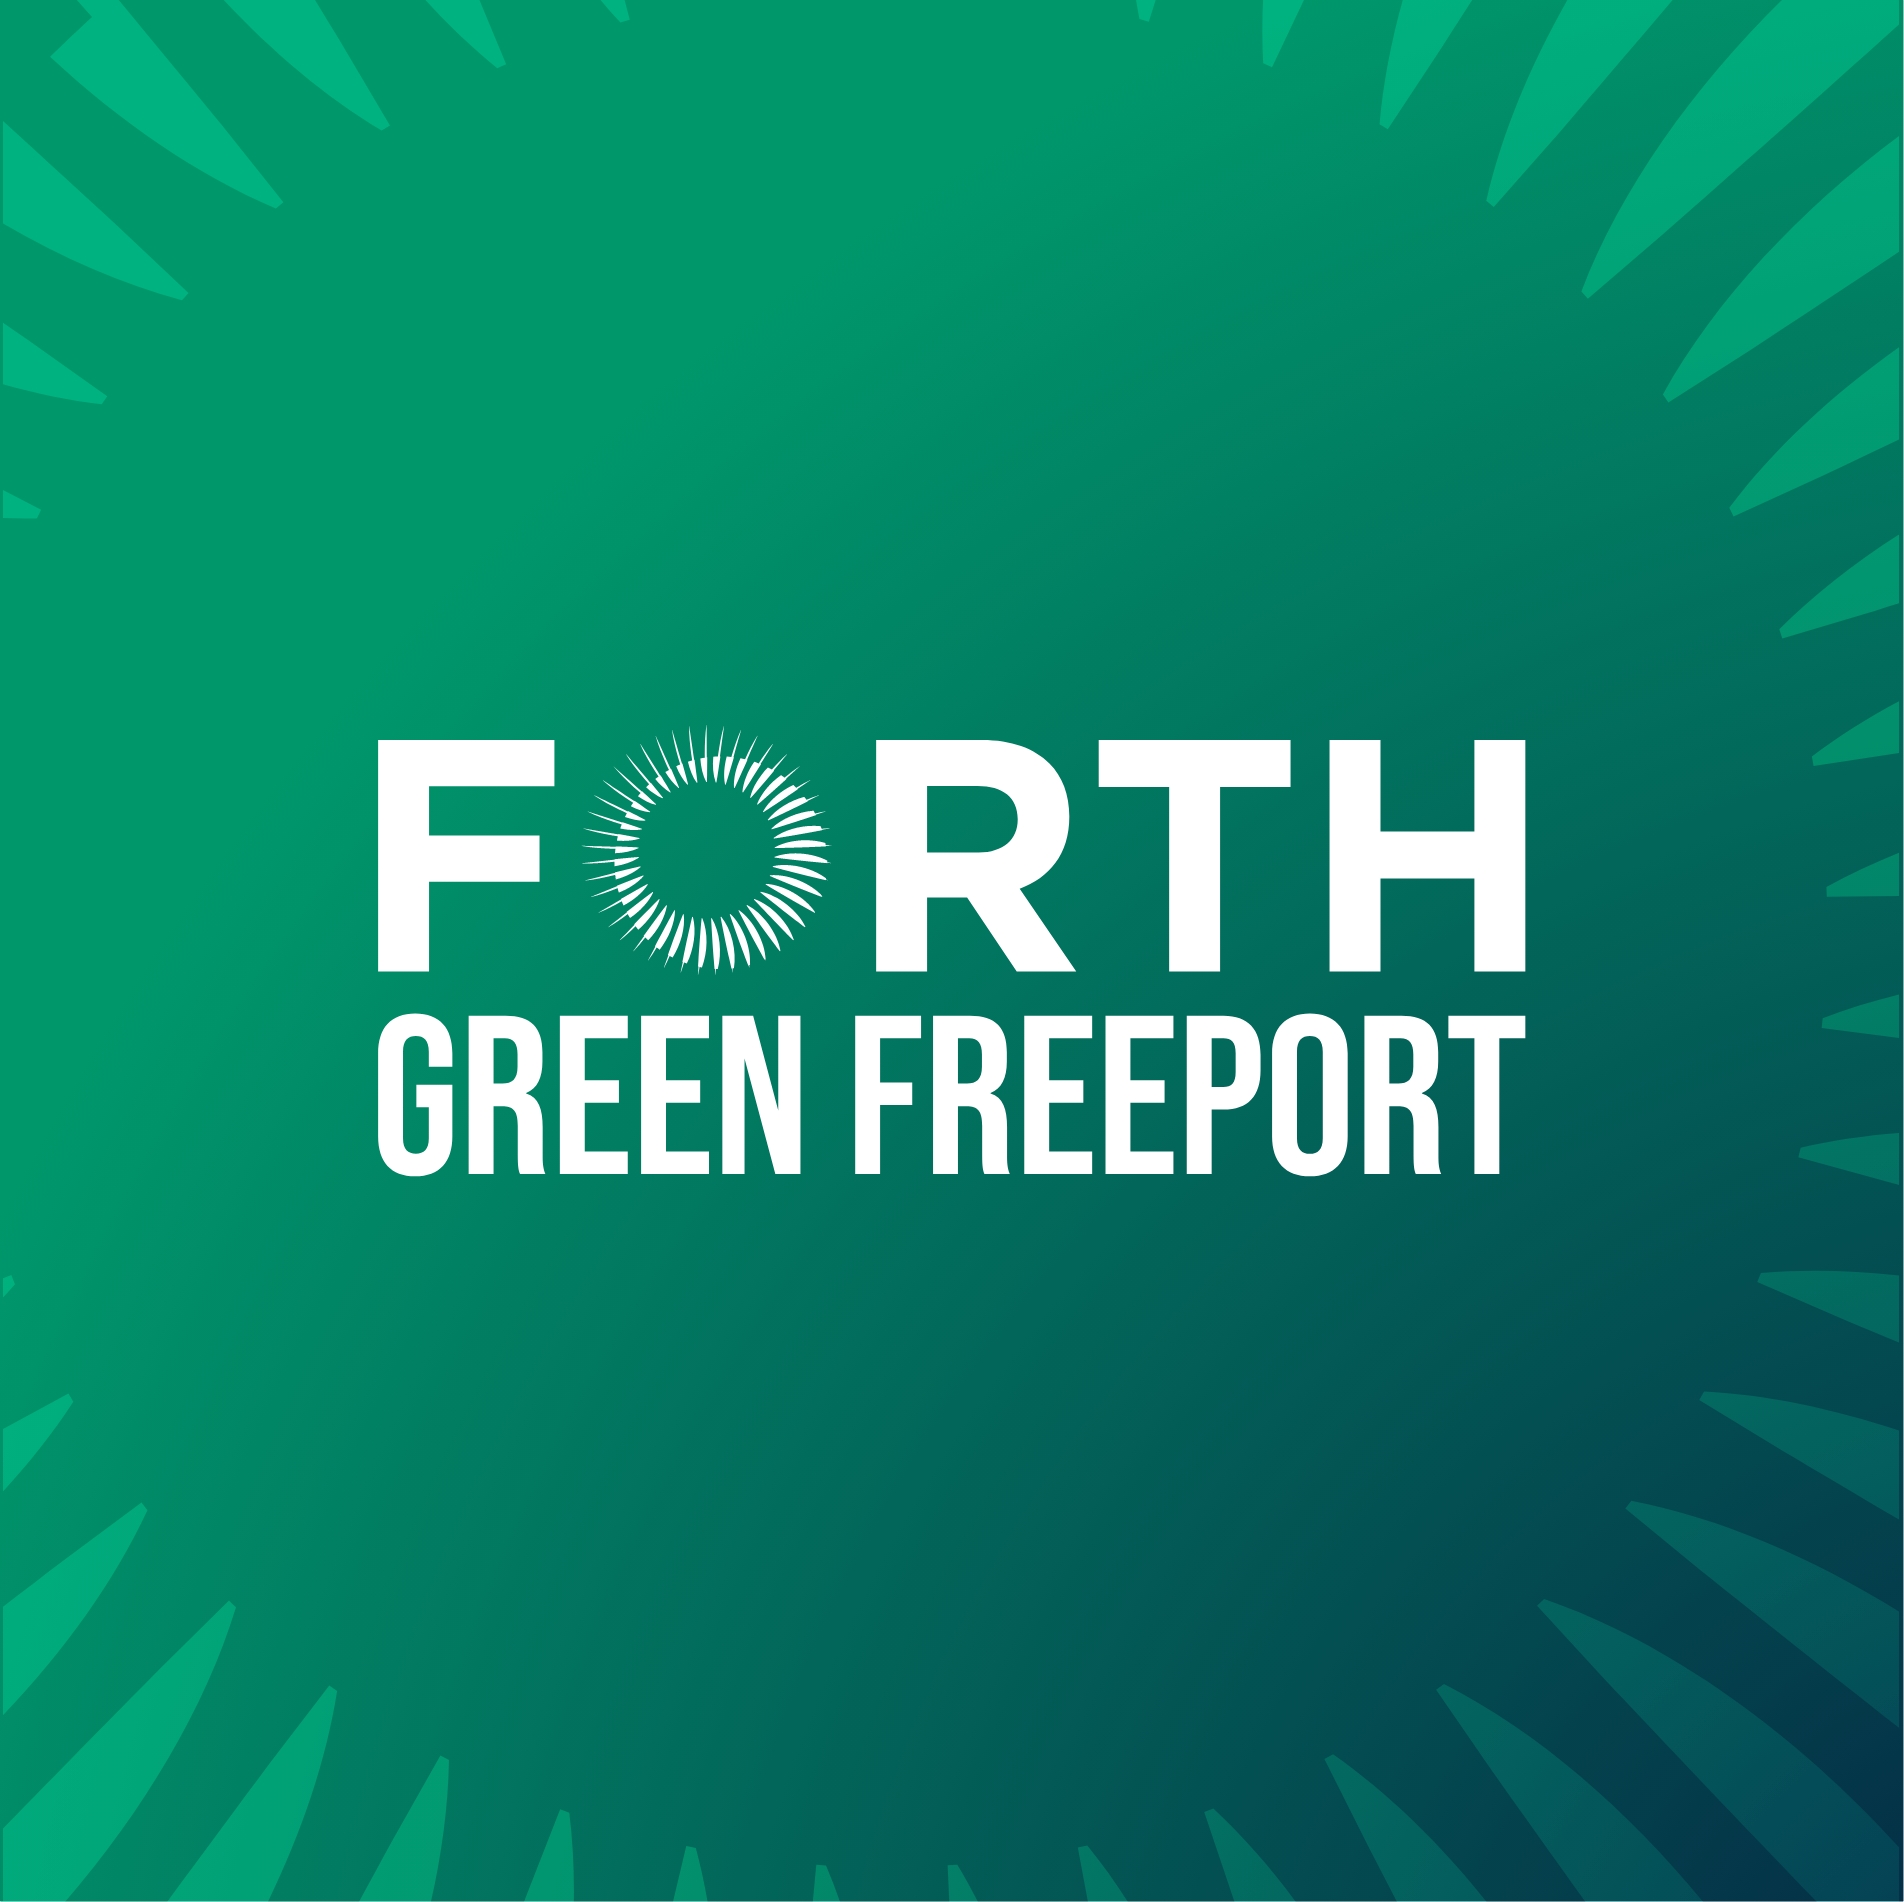 Forth Green Freeport Logo on a green background